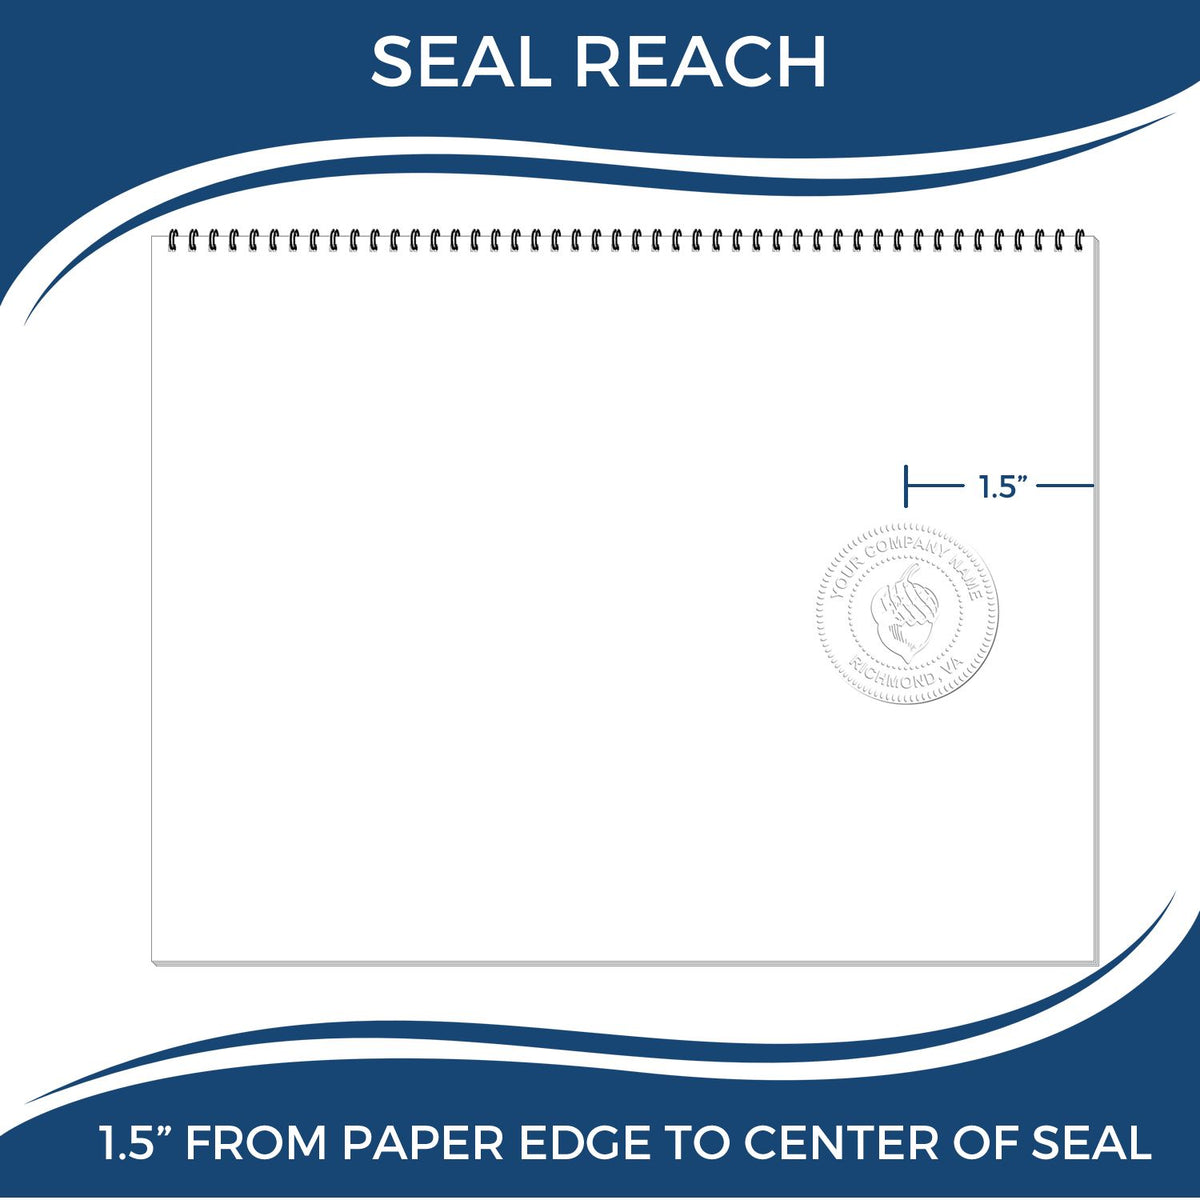 An infographic showing the seal reach which is represented by a ruler and a miniature seal image of the Soft Texas Professional Geologist Seal